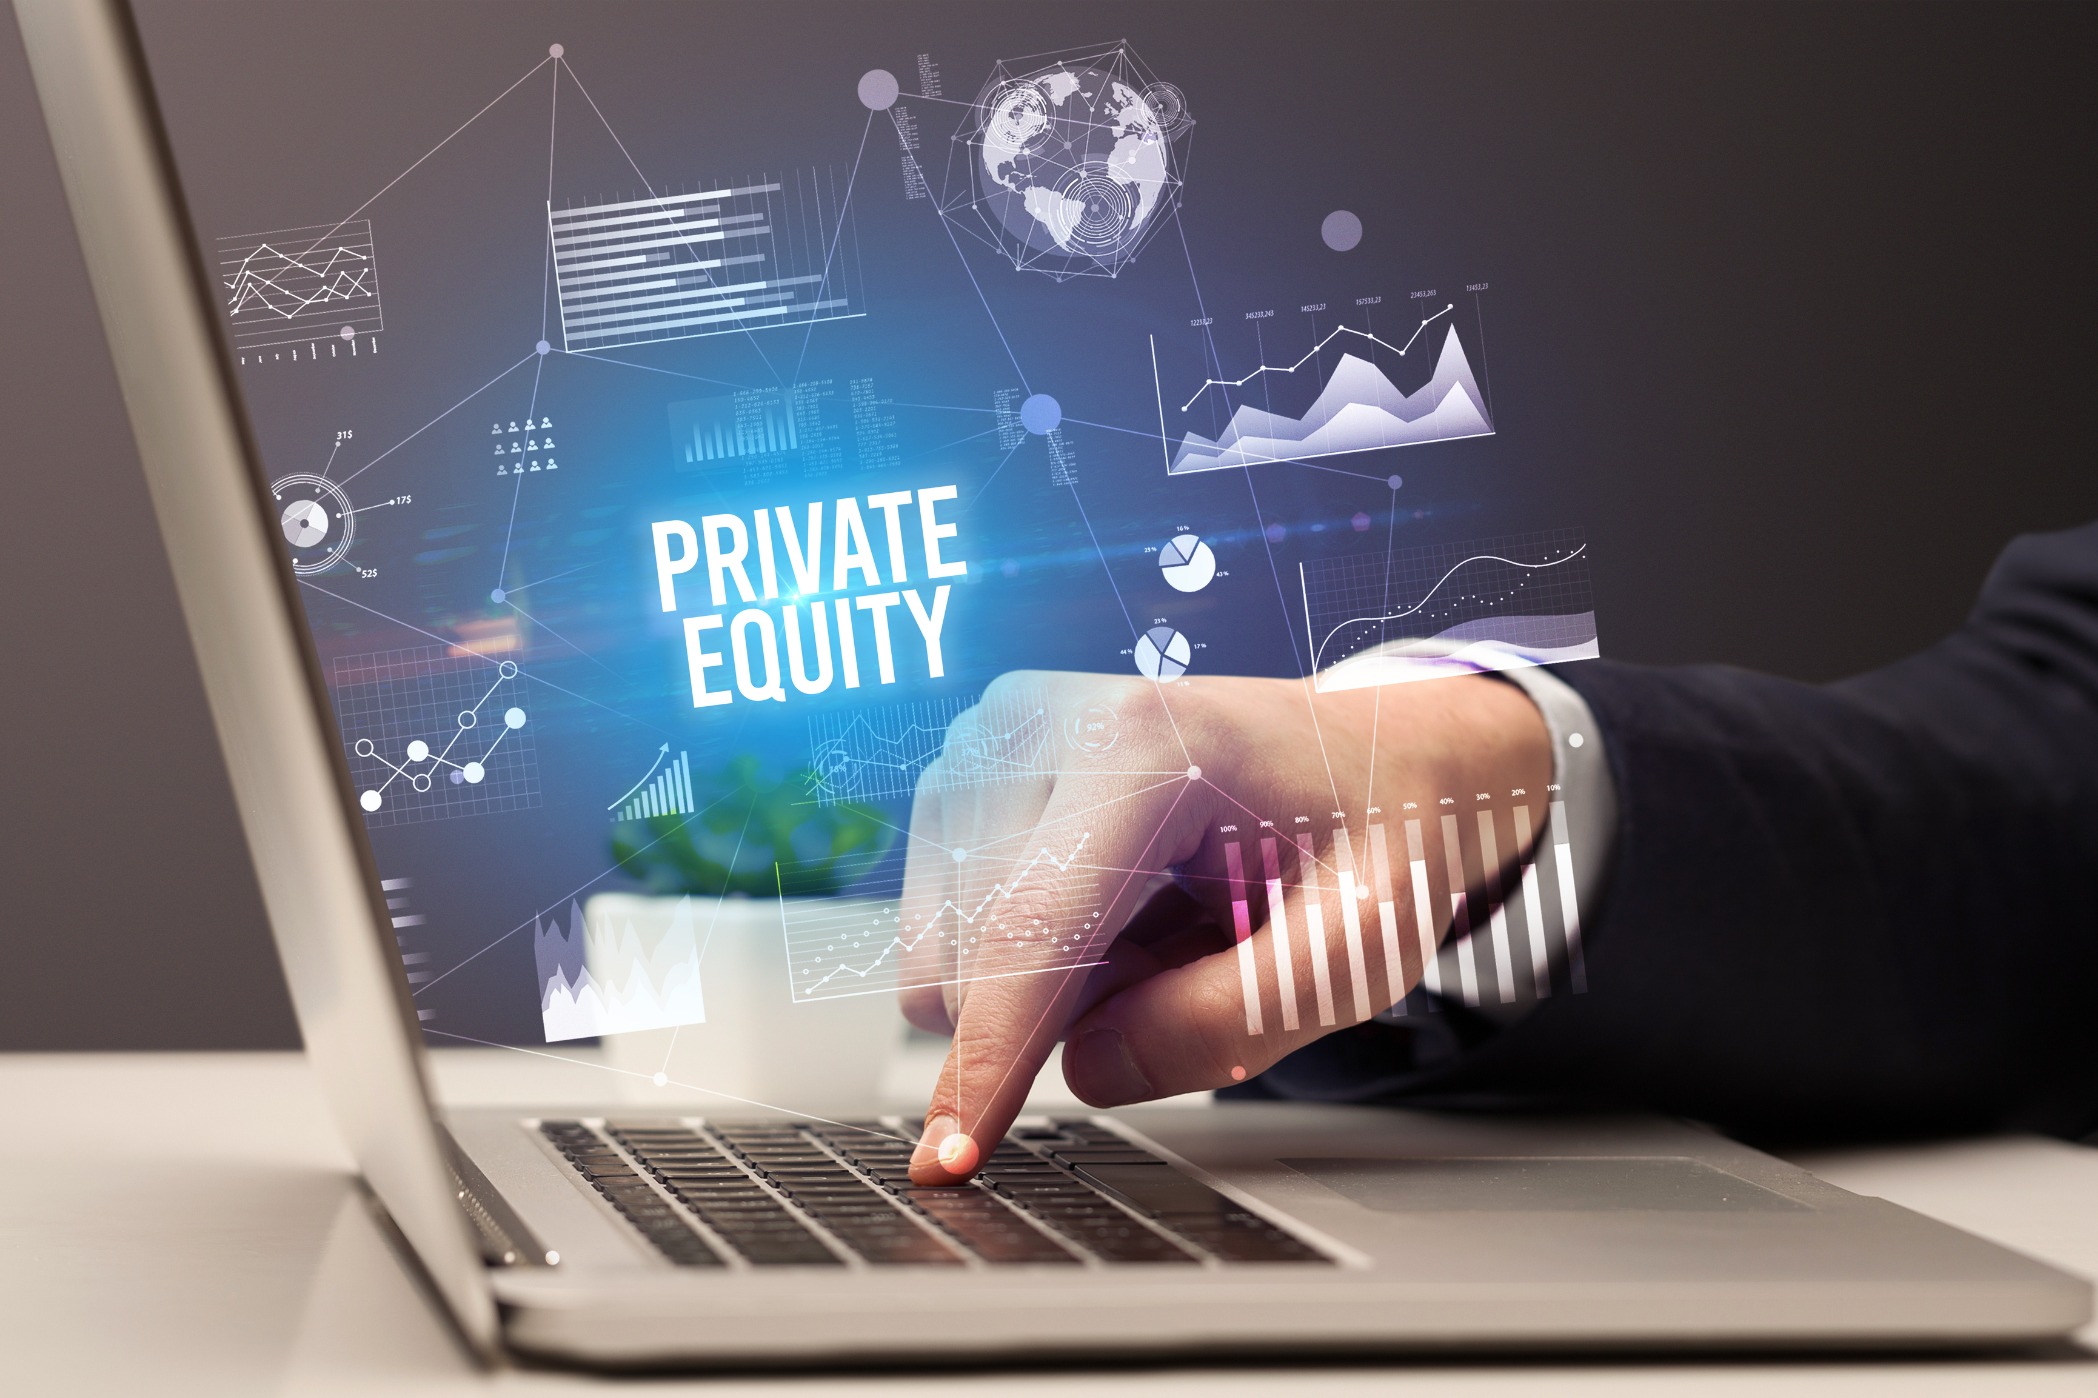 How Private Equity Investment is Disrupting the Legal Industry